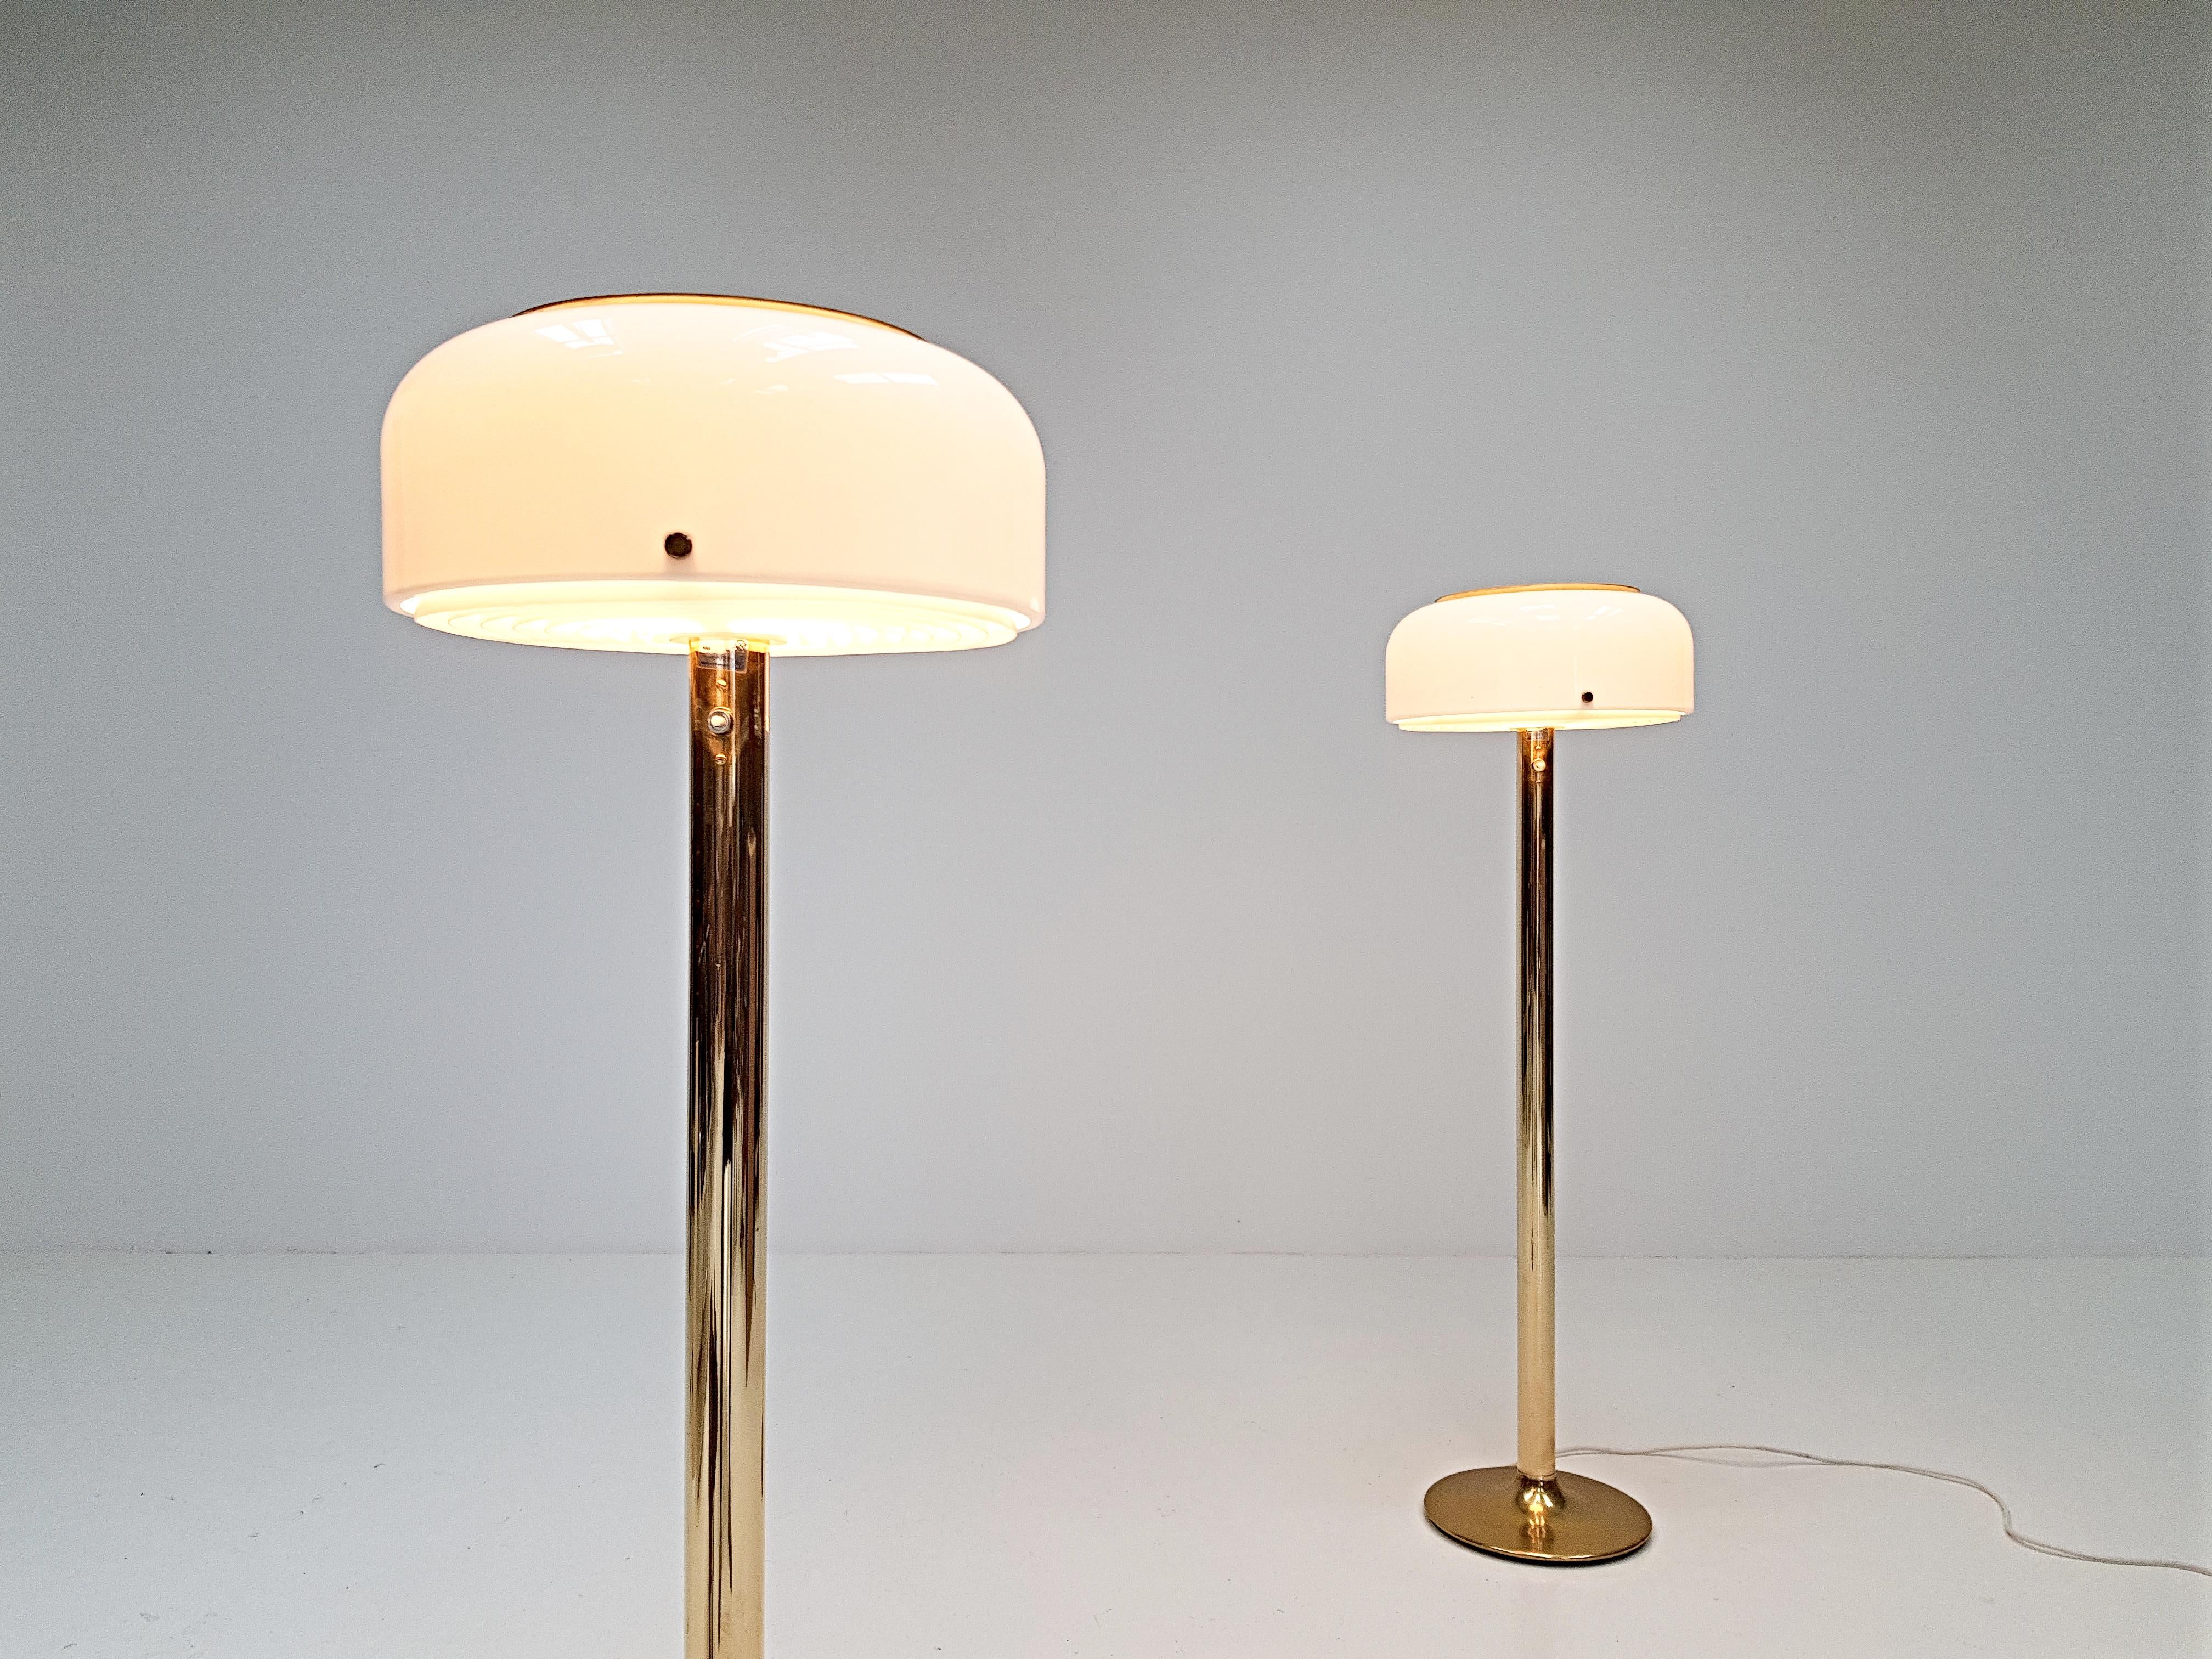 20th Century Pair of Knubbling Floor Lamps by Anders Pehrson for Ateljé Lyktan, 1970s